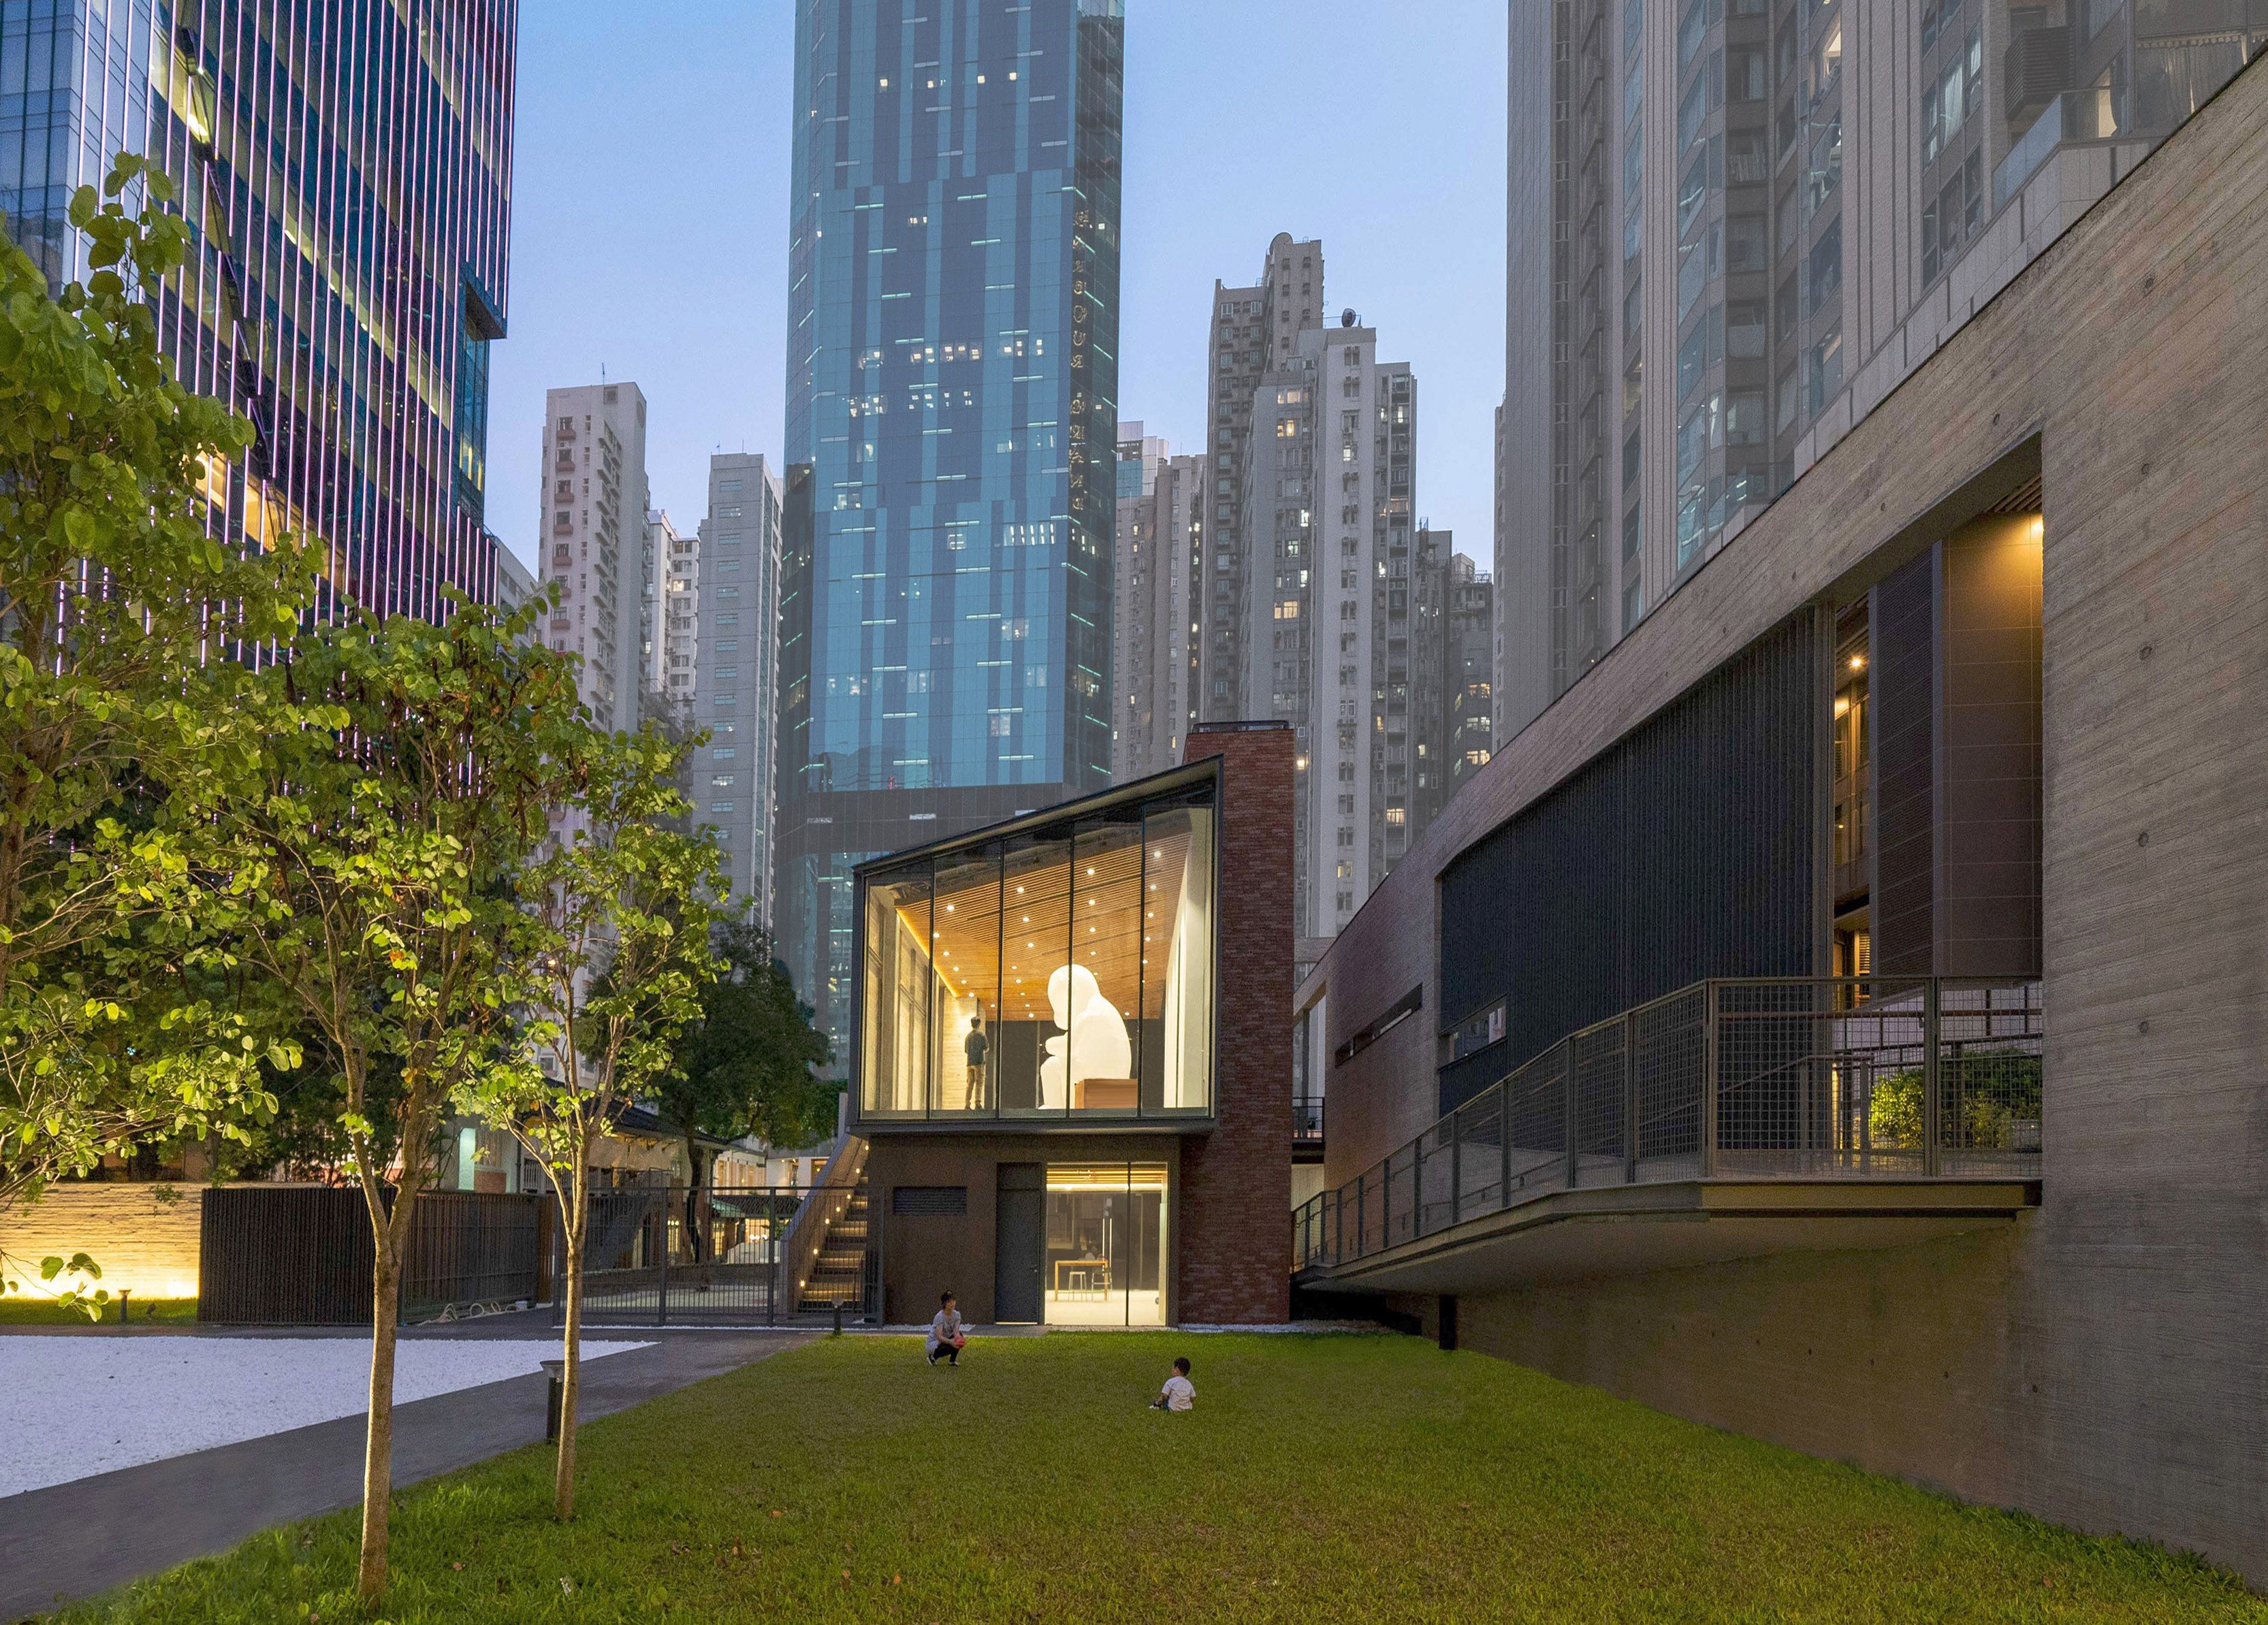 Featured in Raymond Fung’s book, “Untold Stories: Hong Kong Architecture”, is the 2022 expansion of the Oi! art space on Oil Street, North Point, by Architectural Services Department architects led by Edward Wong. 